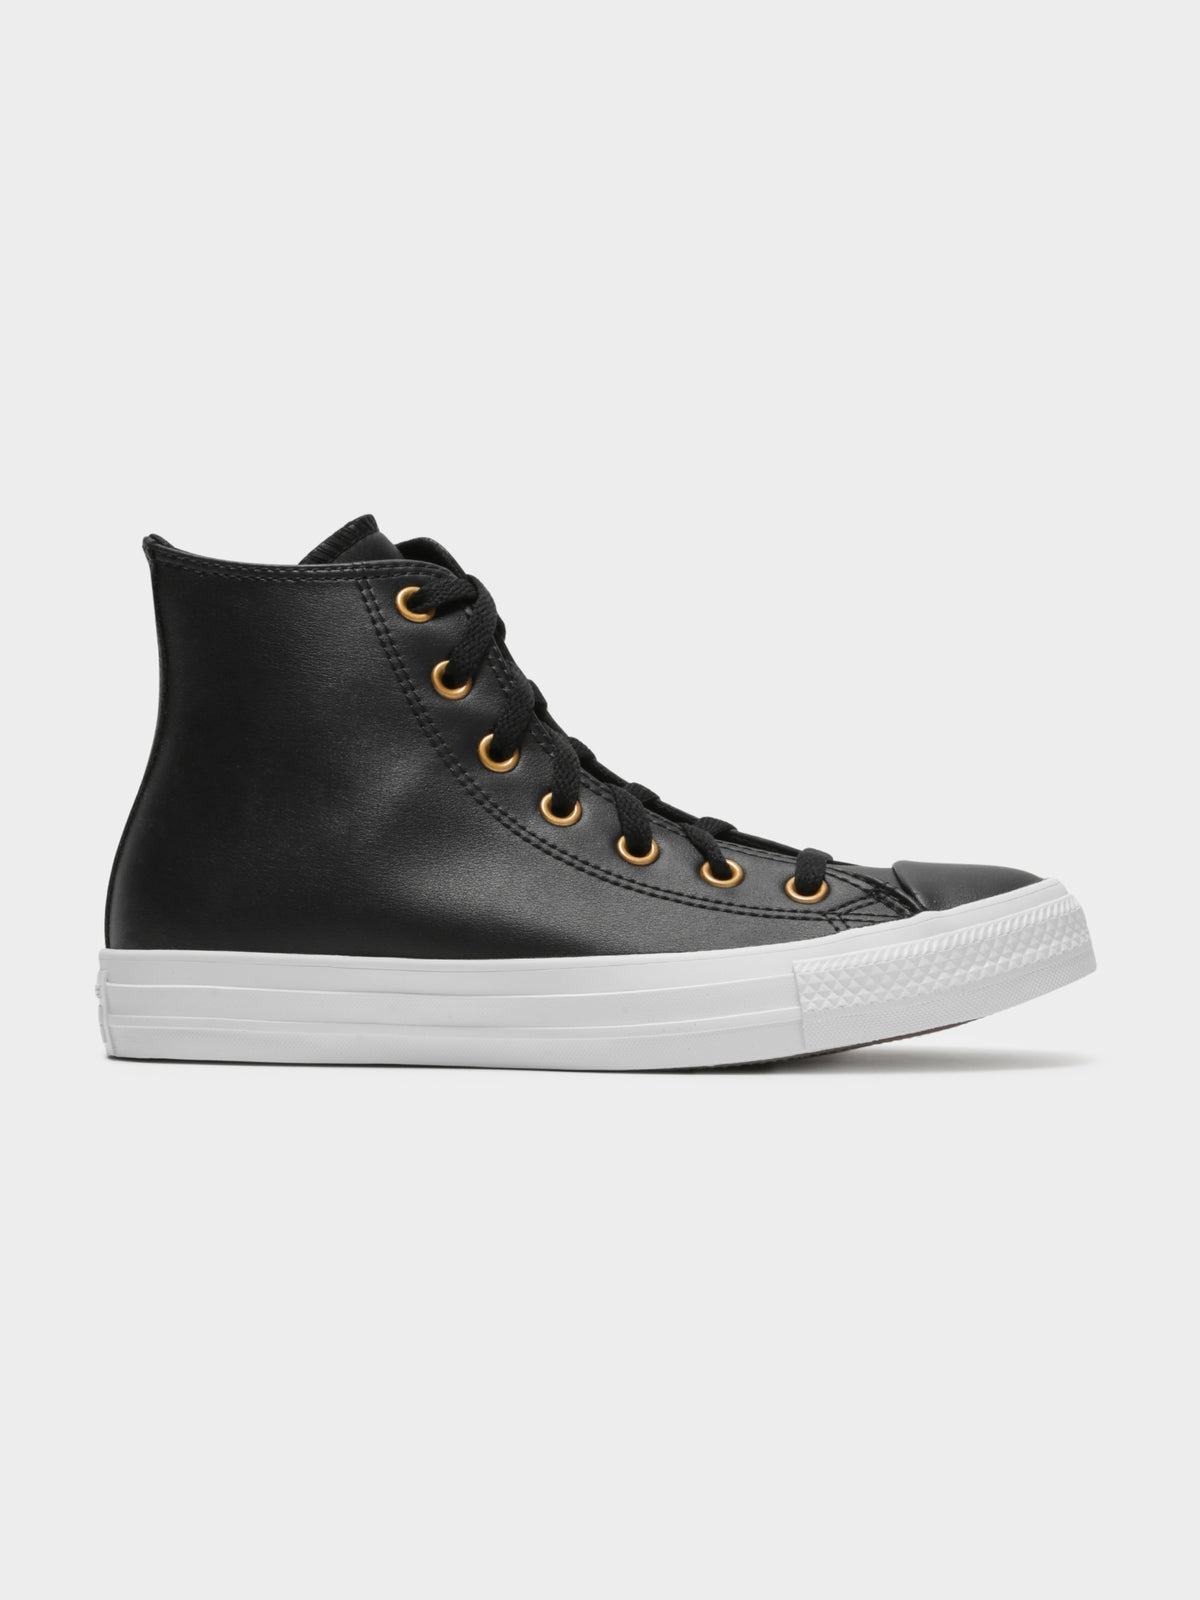 Womens Converse Chuck Taylor All Star Go Gold SL High Top in Black